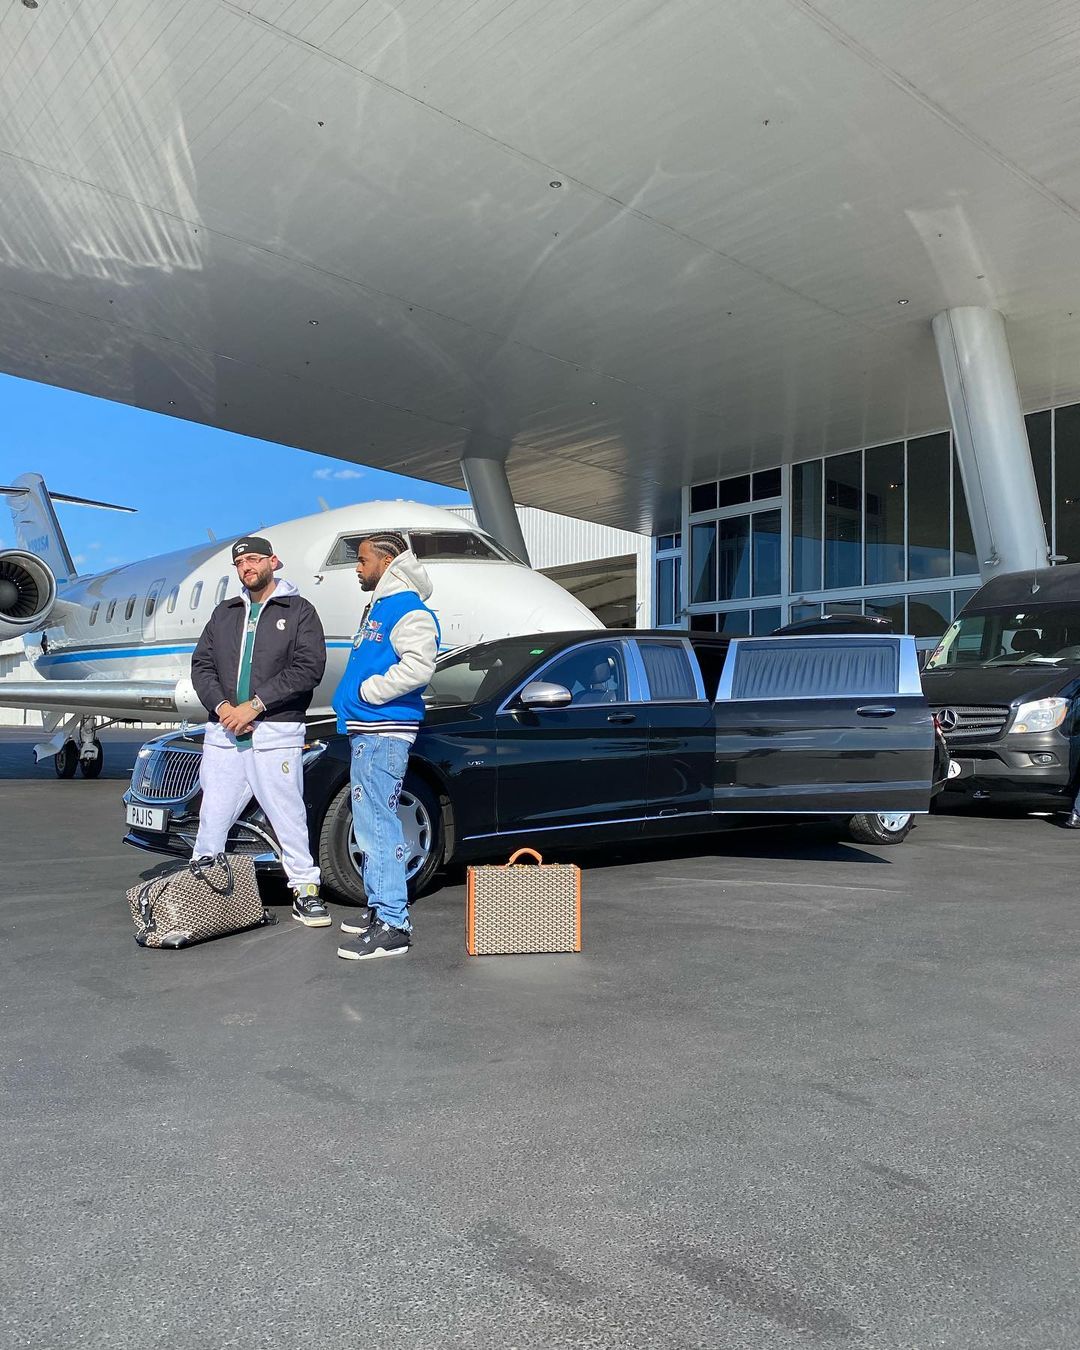 SPOTTED: Gunna dons Louis Vuitton laden look with Duck Bag – PAUSE